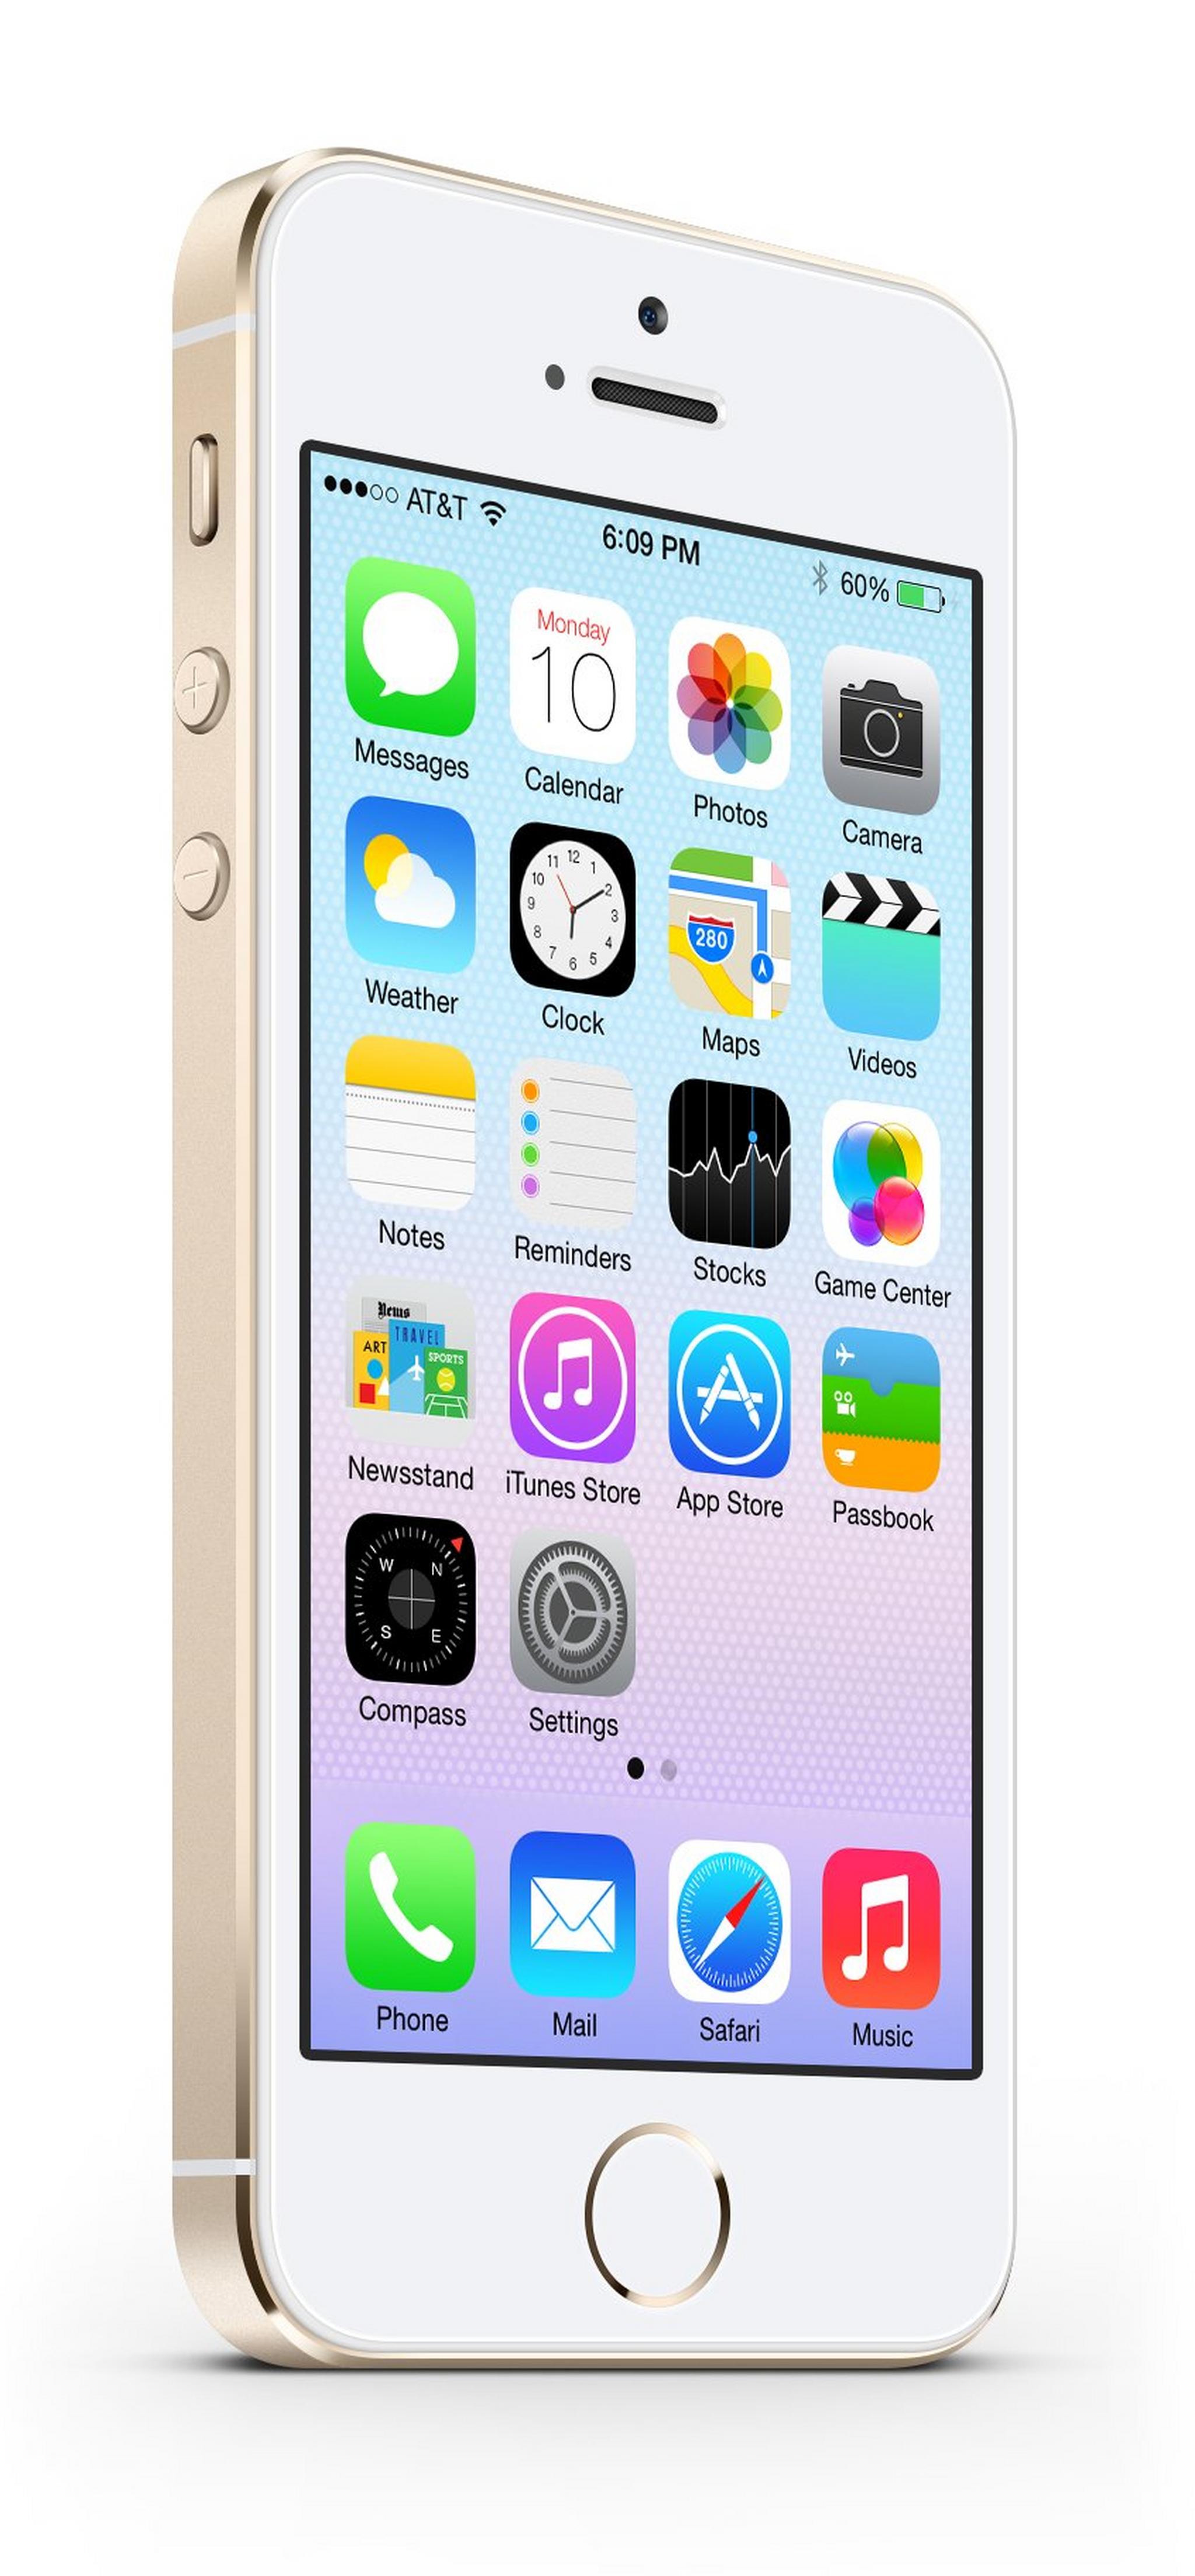 iPhone 5S 16GB 8MP 4-inch Smartphone - Gold